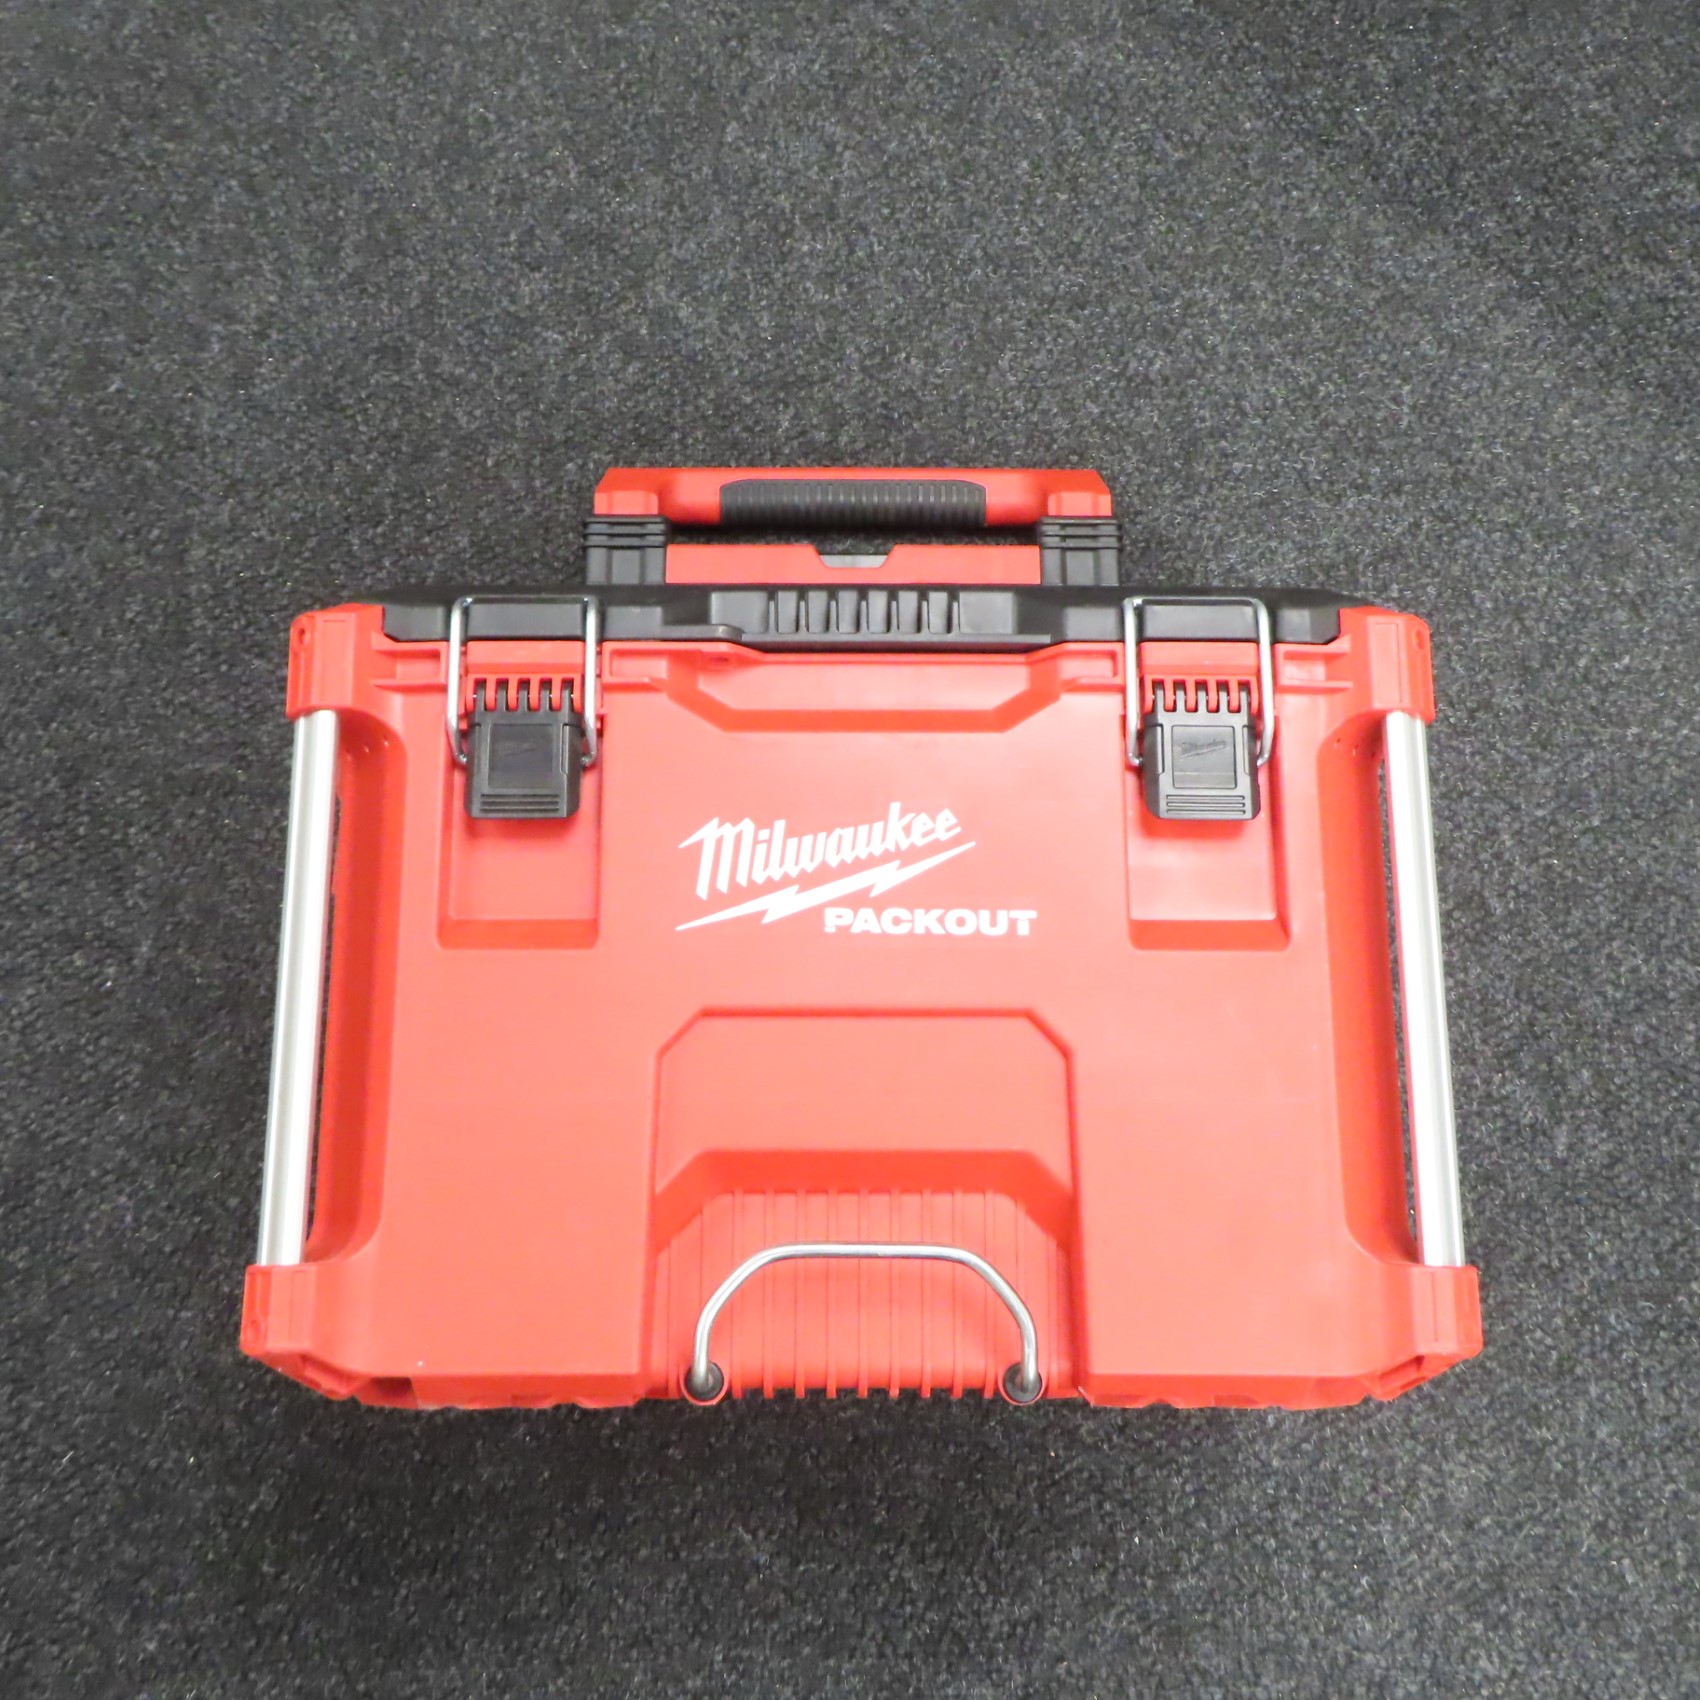 Milwaukee PACKOUT Rolling Tool Box - 48-22-8426